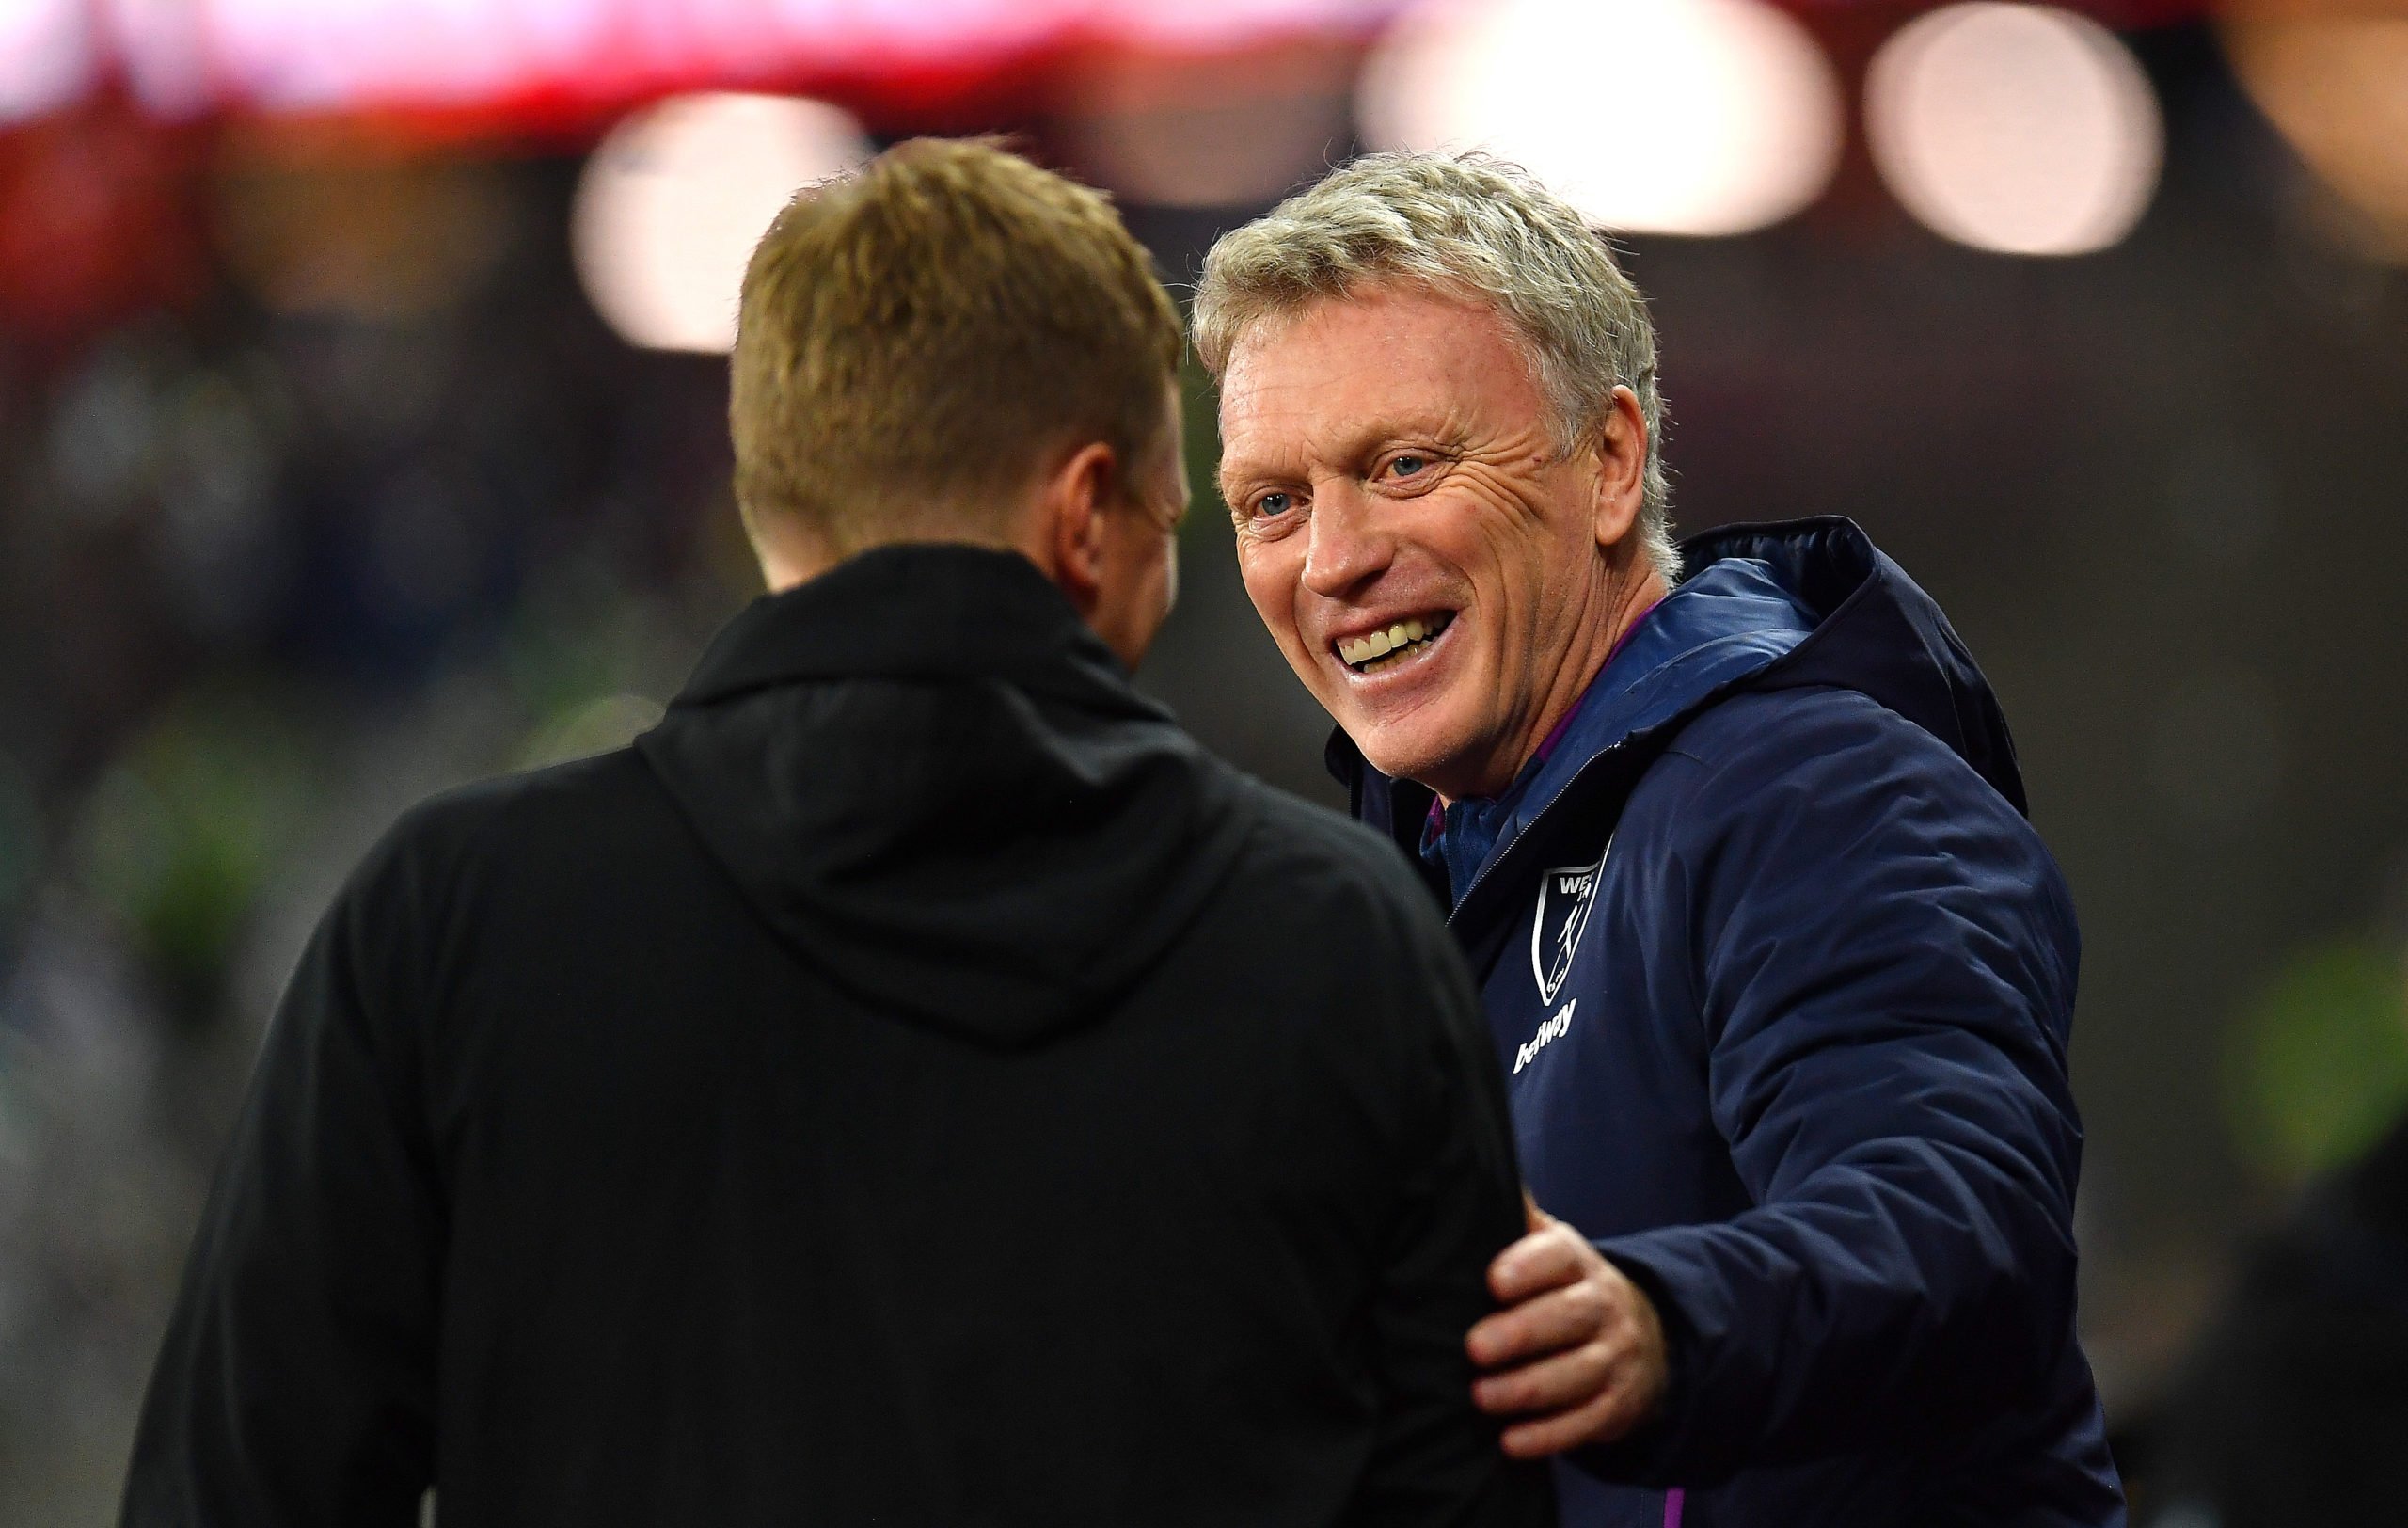 Newcastle boss Eddie Howe's wise words serve as a major warning to West Ham counterpart David Moyes over transfers